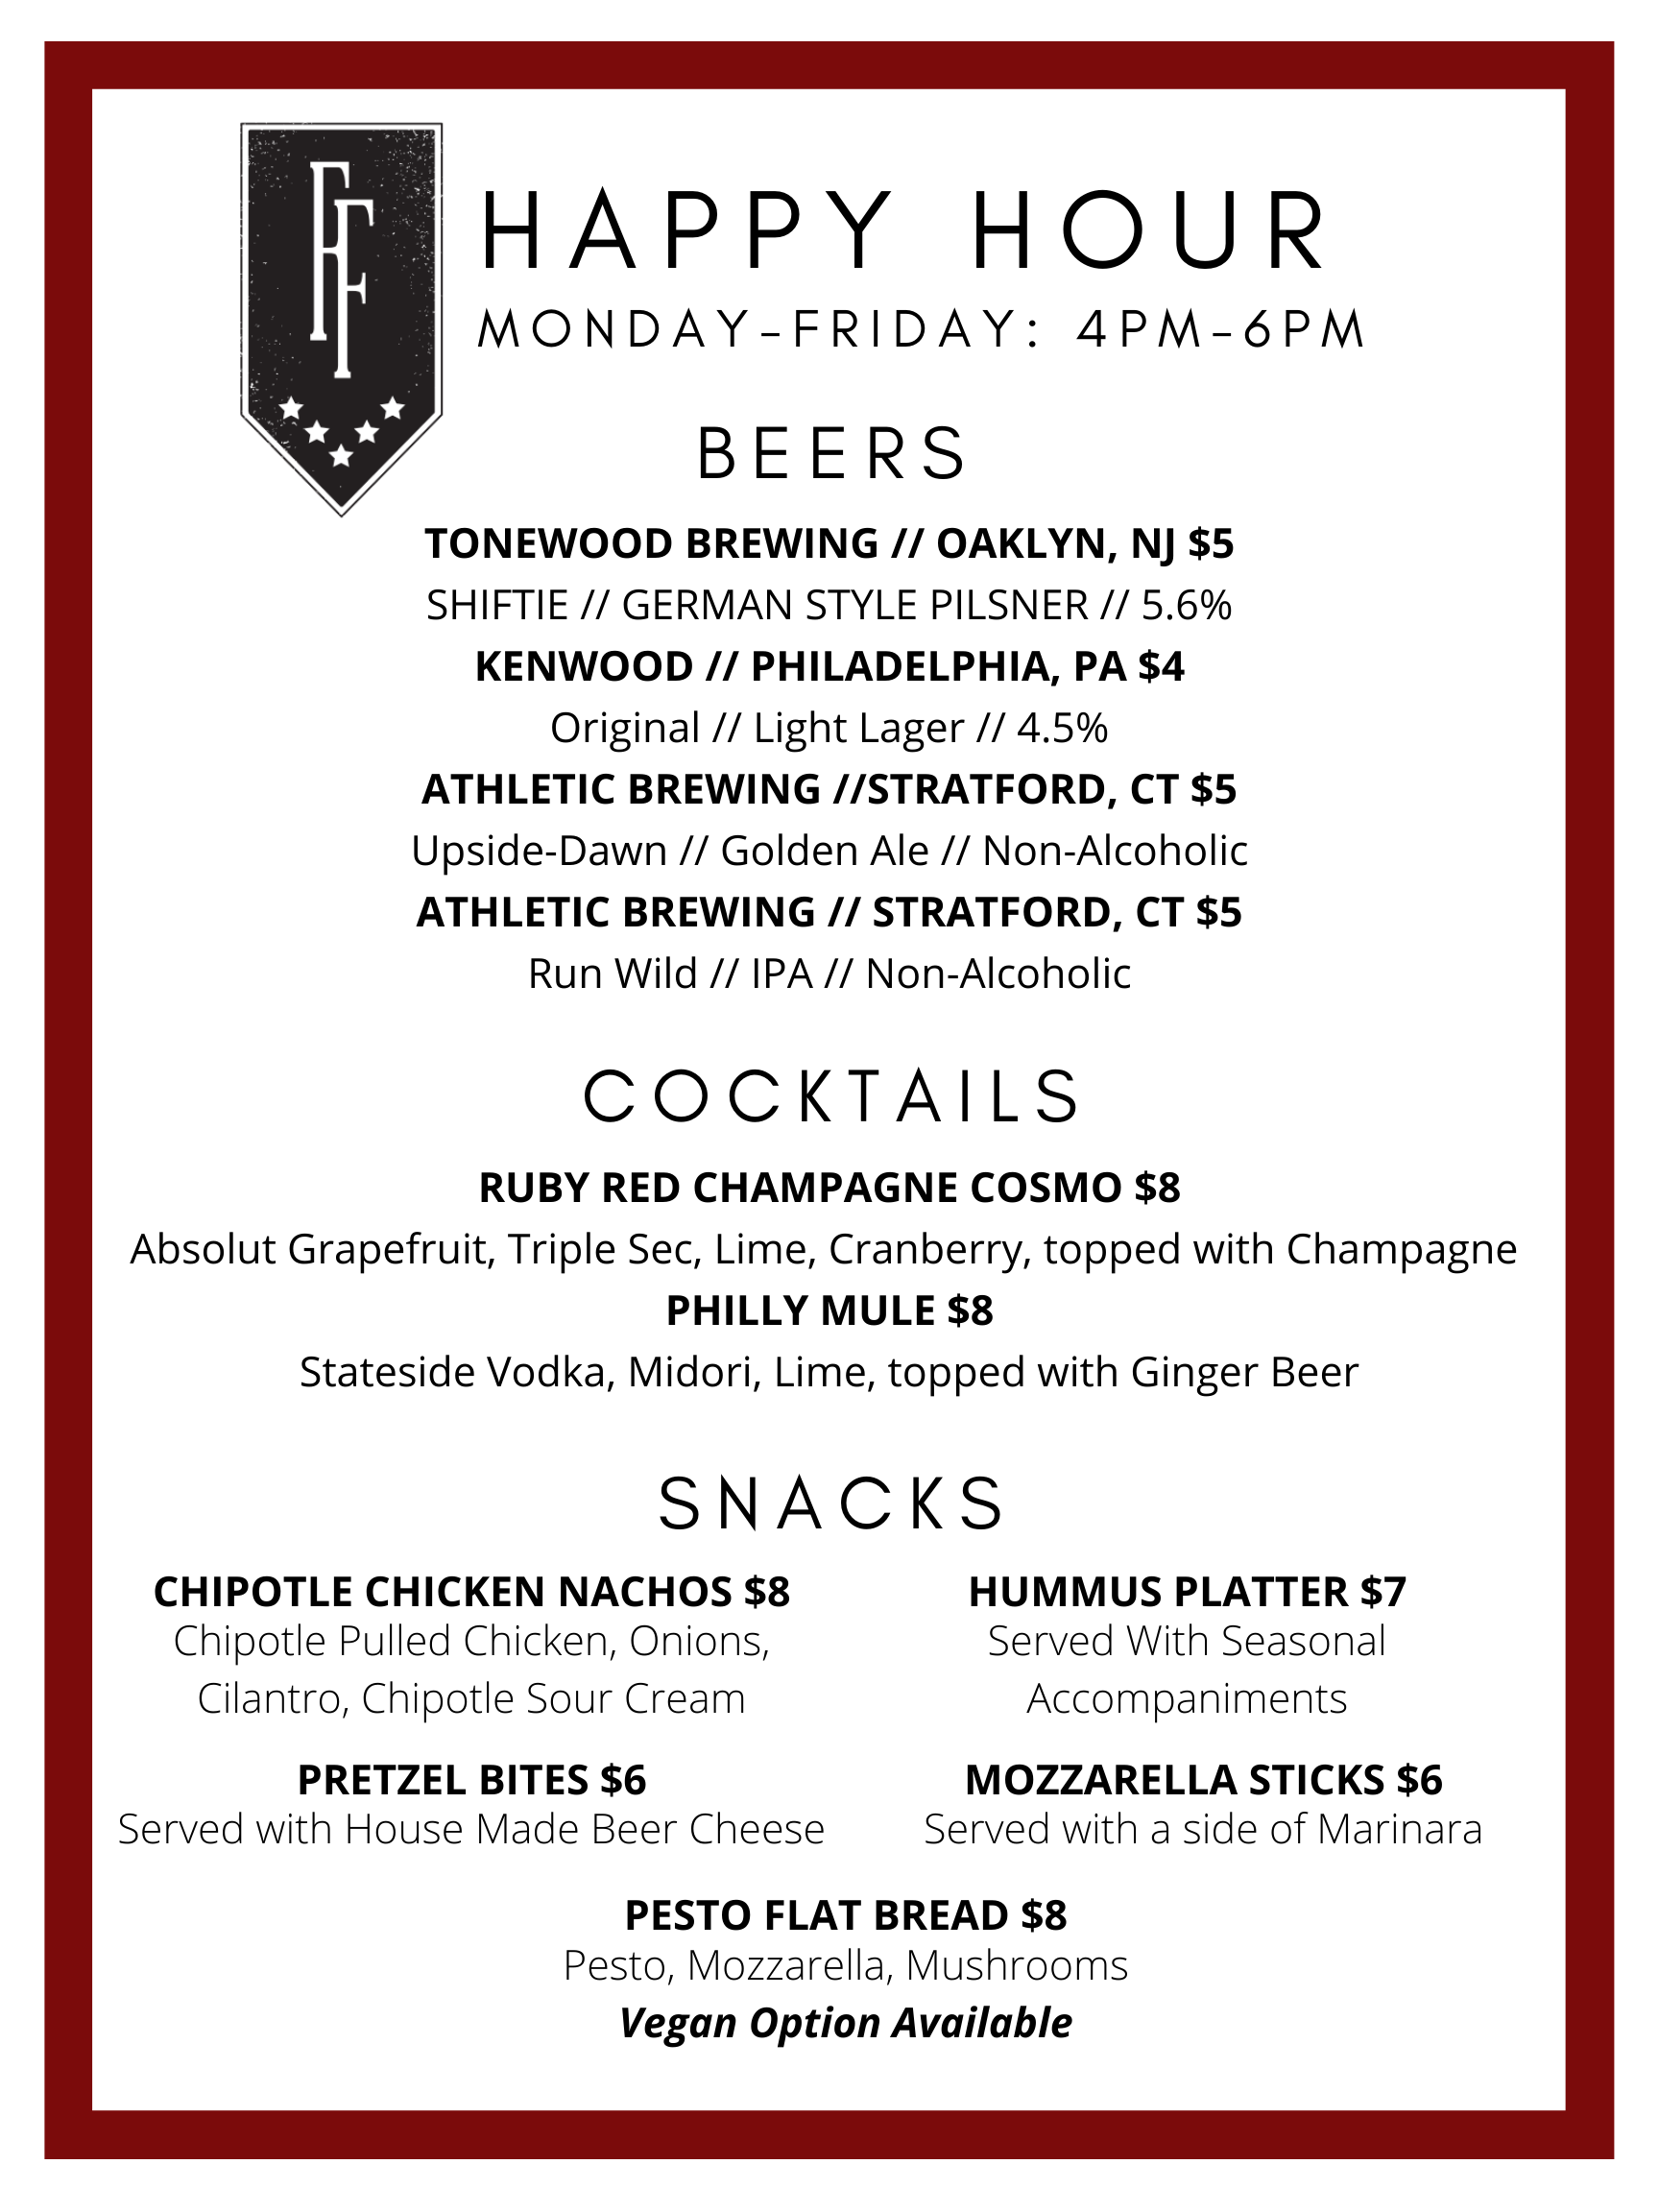 New Happy Hour Menu — Founding Fathers Sports Bar